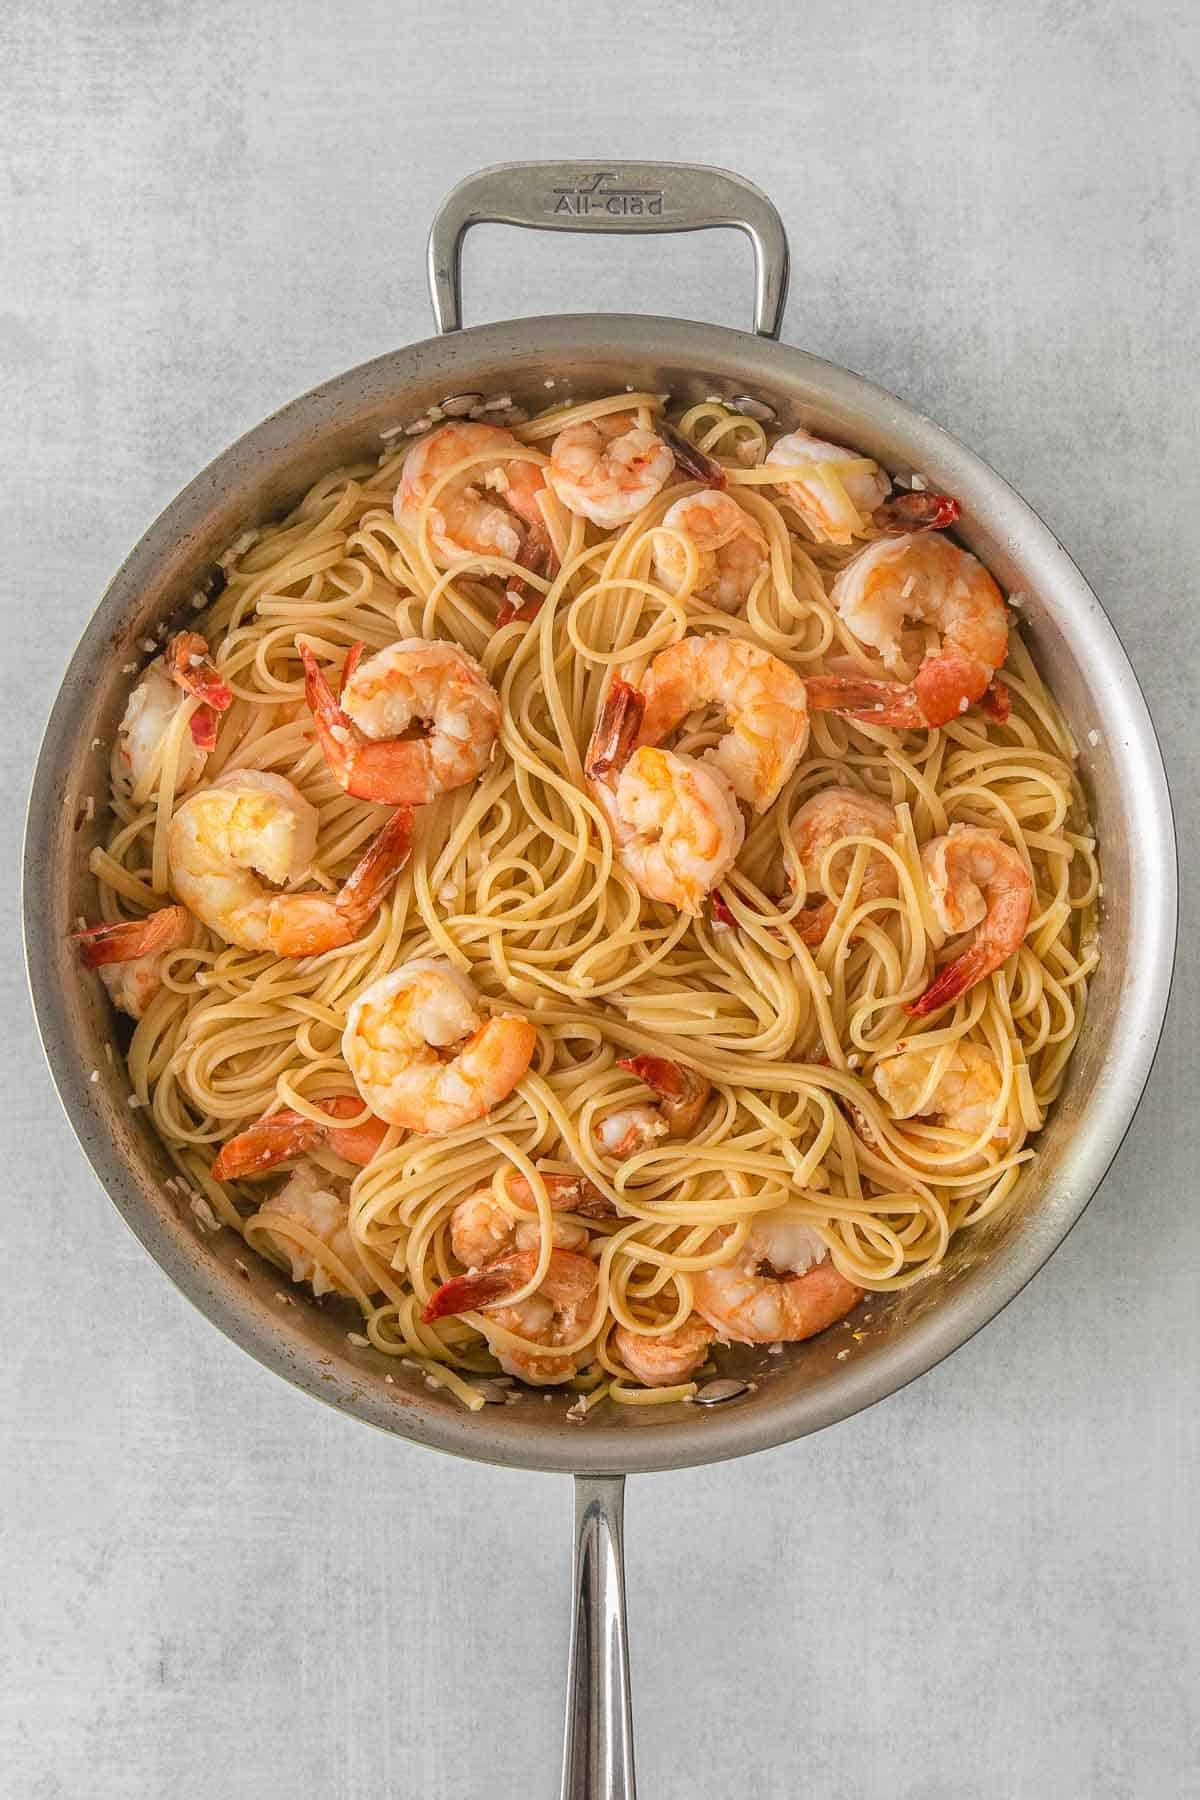 Stainless steel skillet with cooked shrimp over pasta.